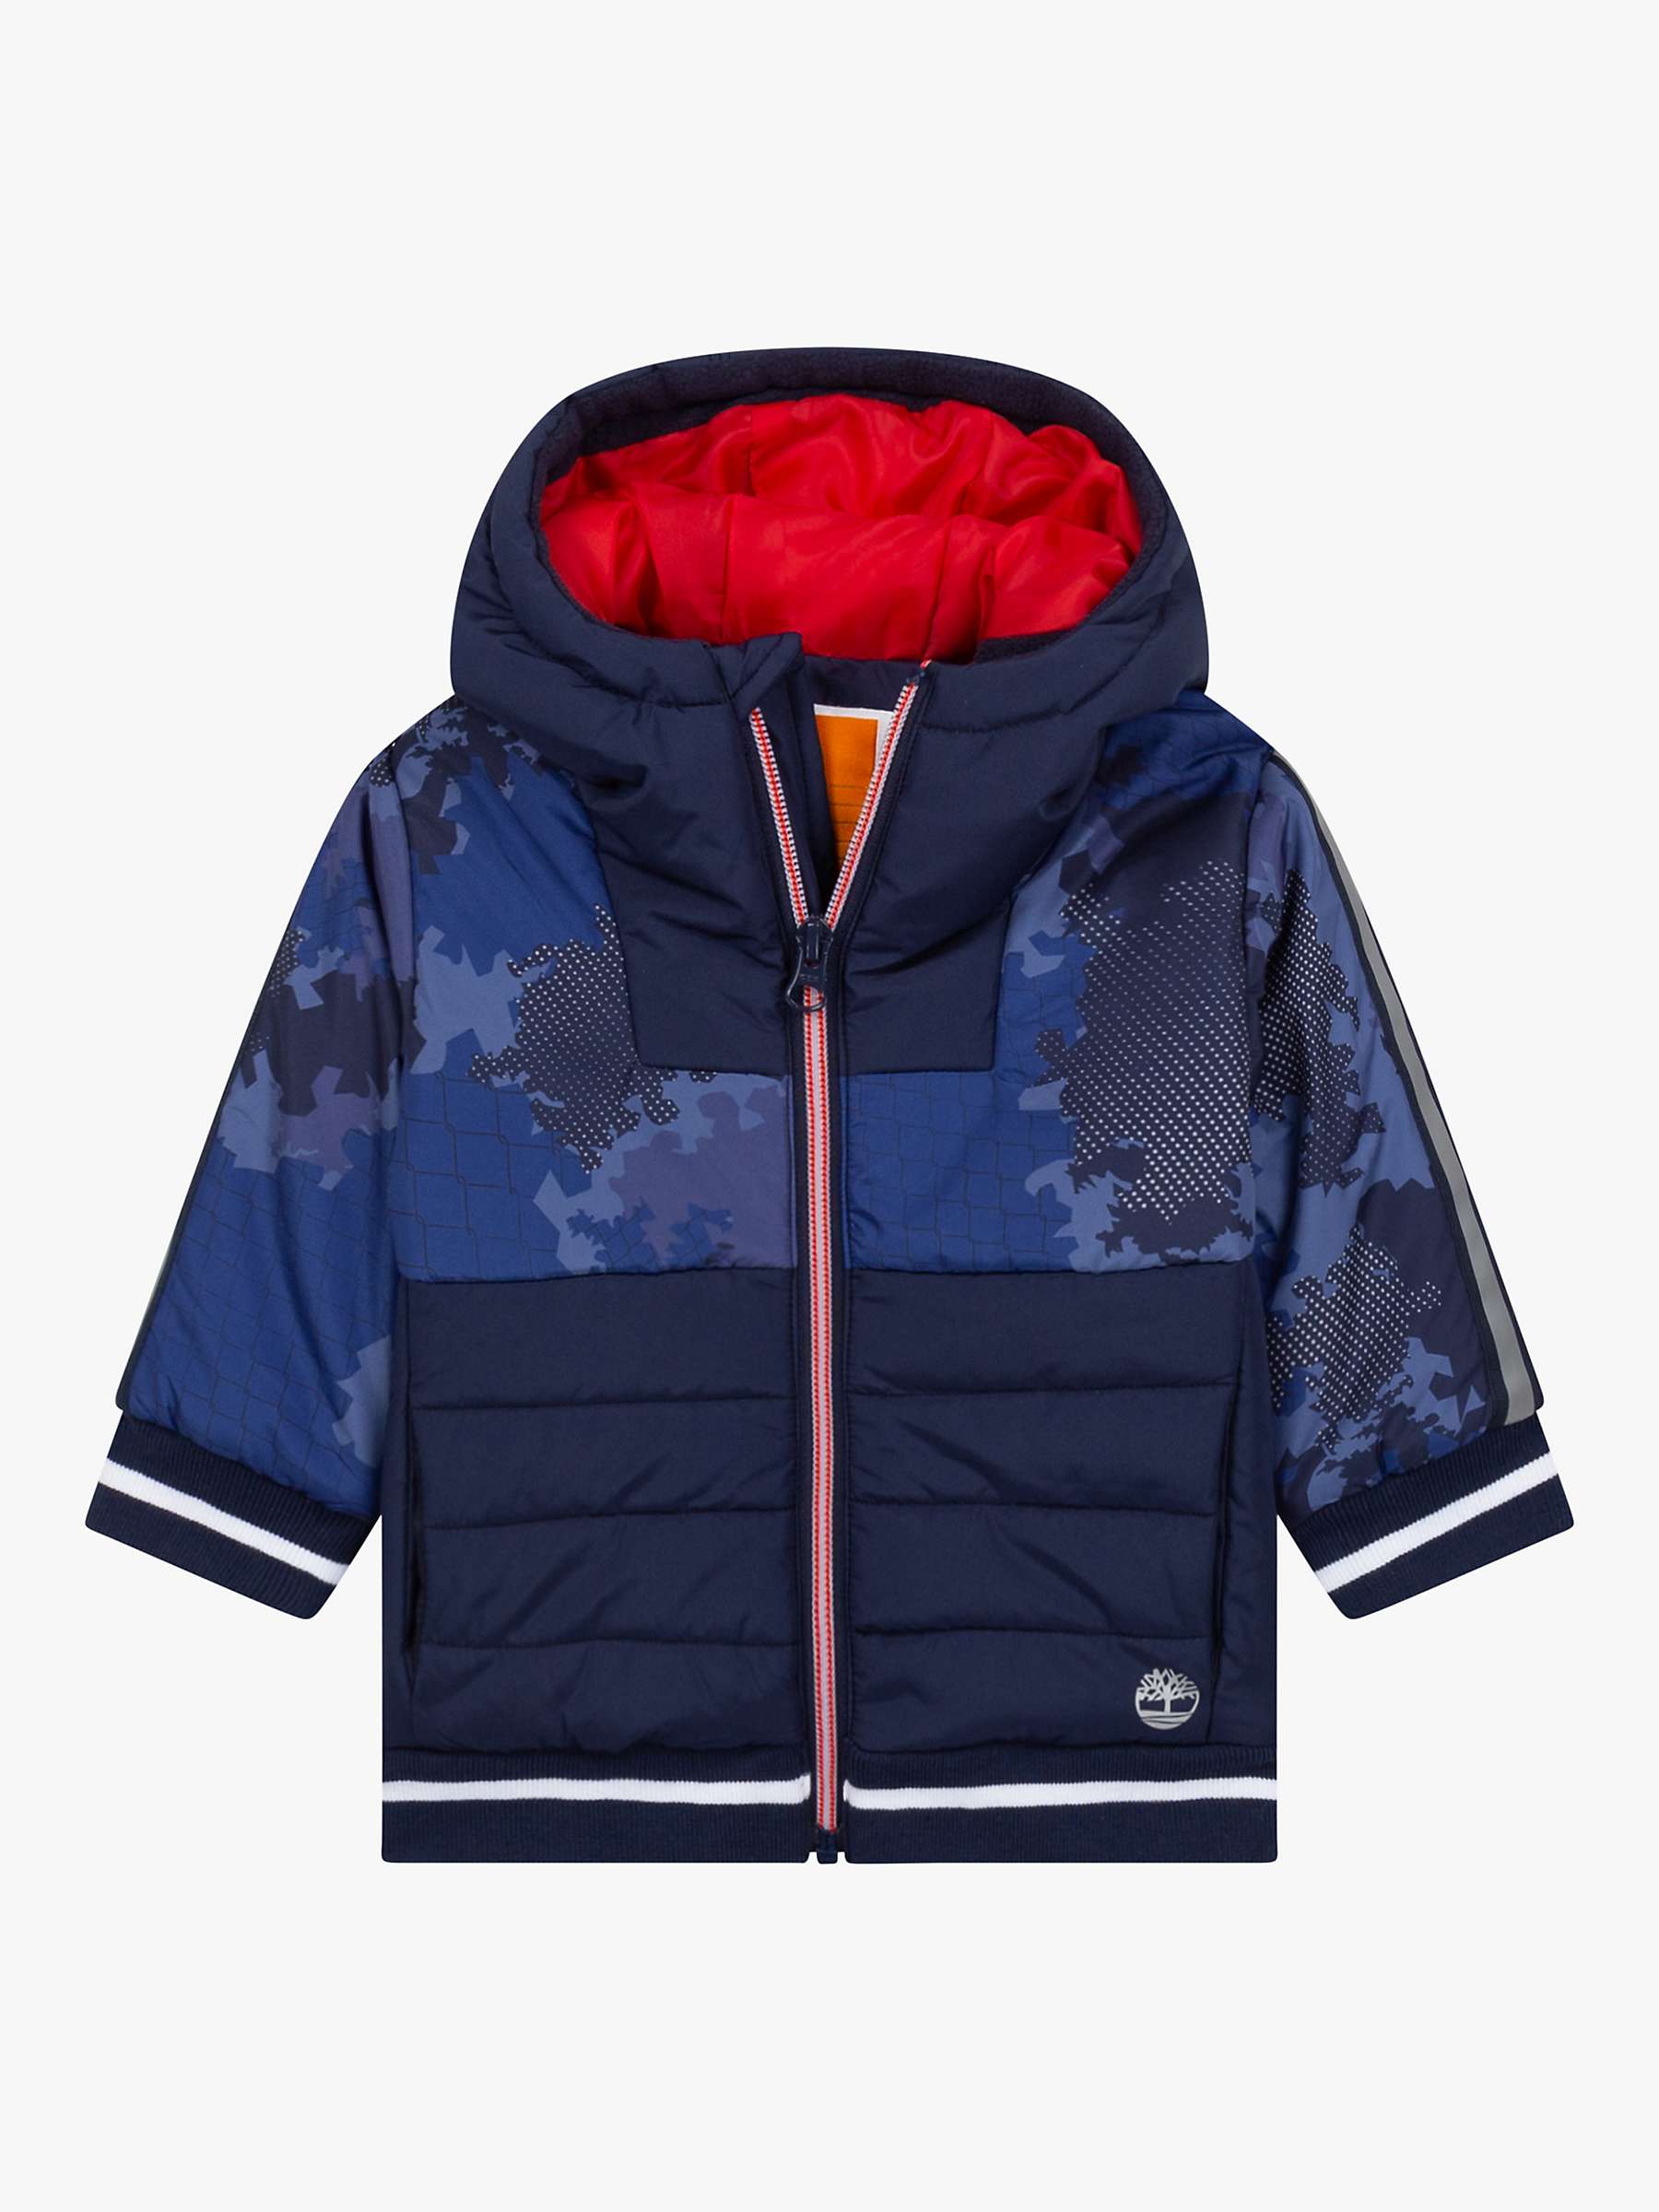 Buy Timberland Baby Camouflage Print Puffer Jacket, Navy Online at johnlewis.com